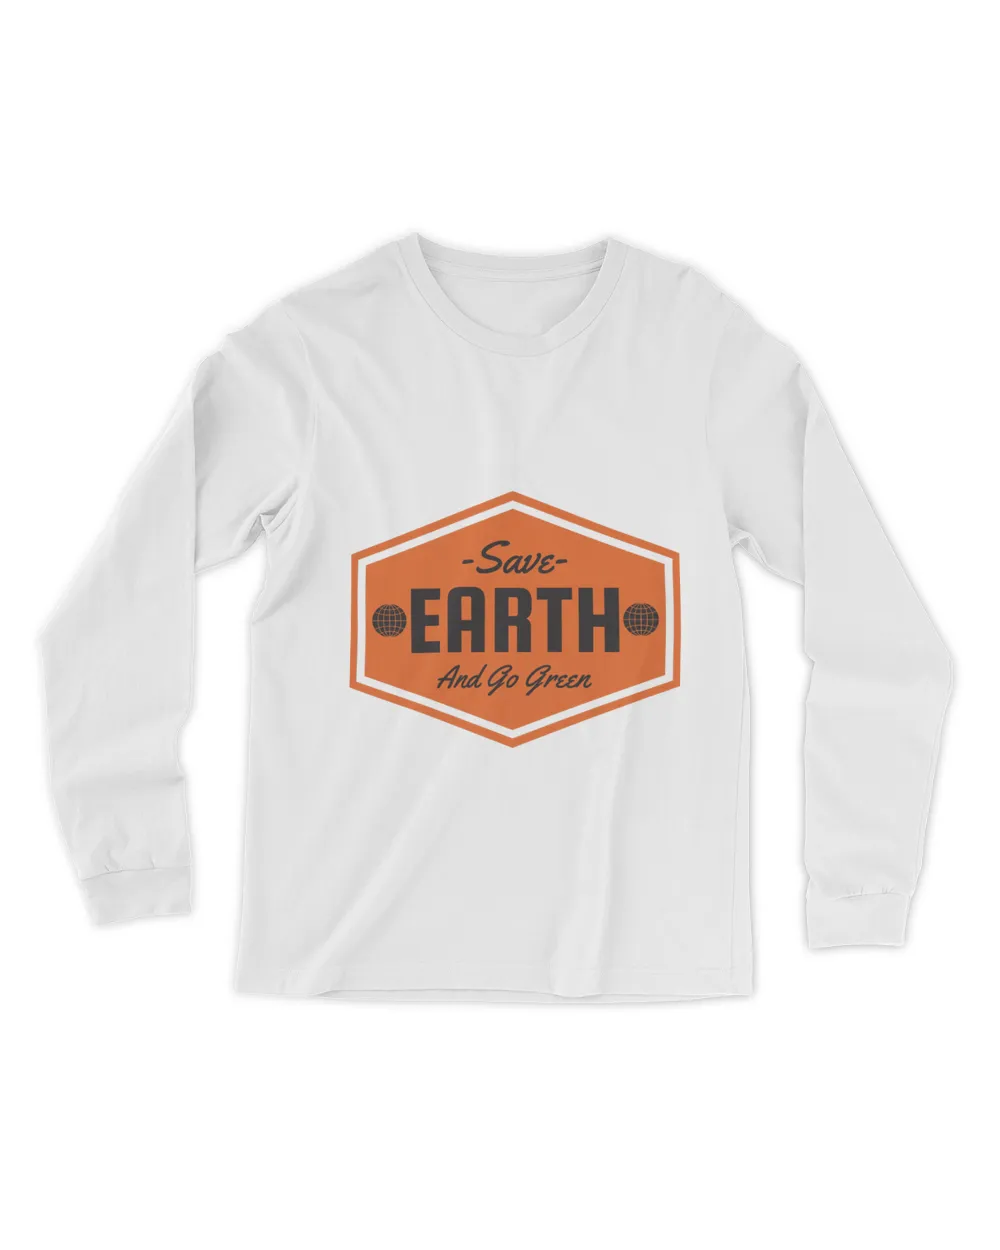 Save Earth And Go Green (Earth Day Slogan T-Shirt)